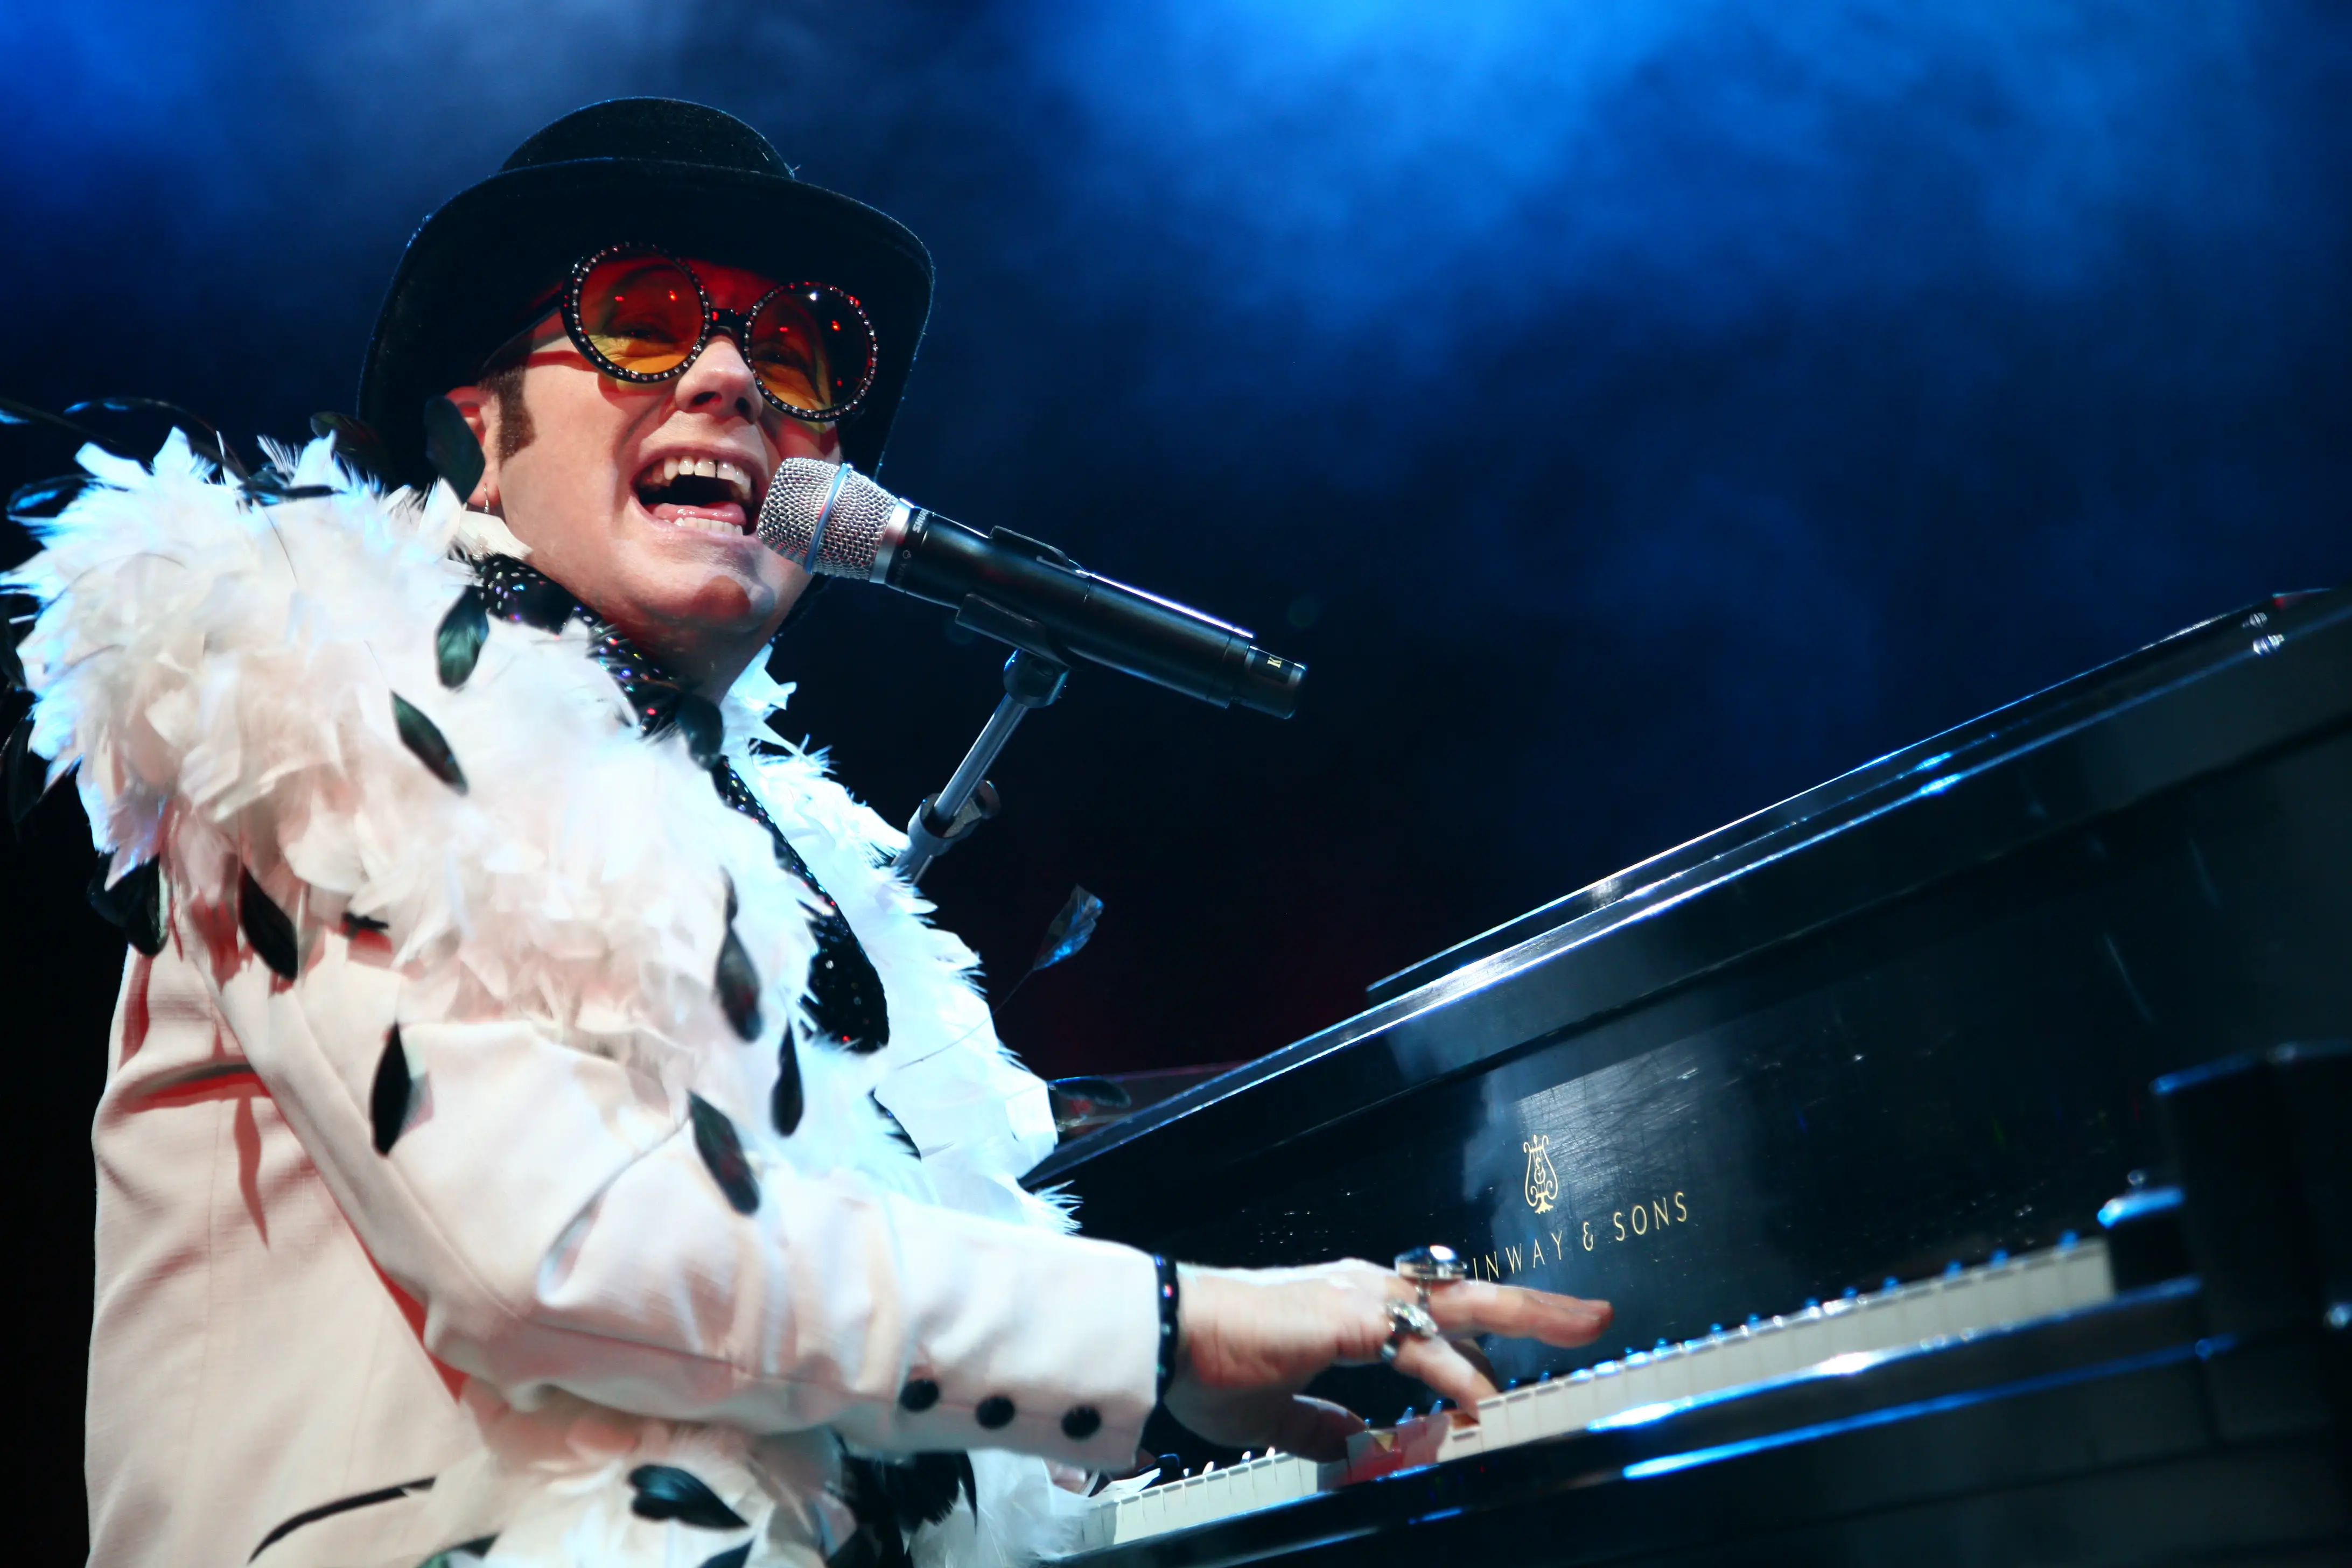 19 Unique & Interesting Elton John Facts You Probably Didn’t Know Before